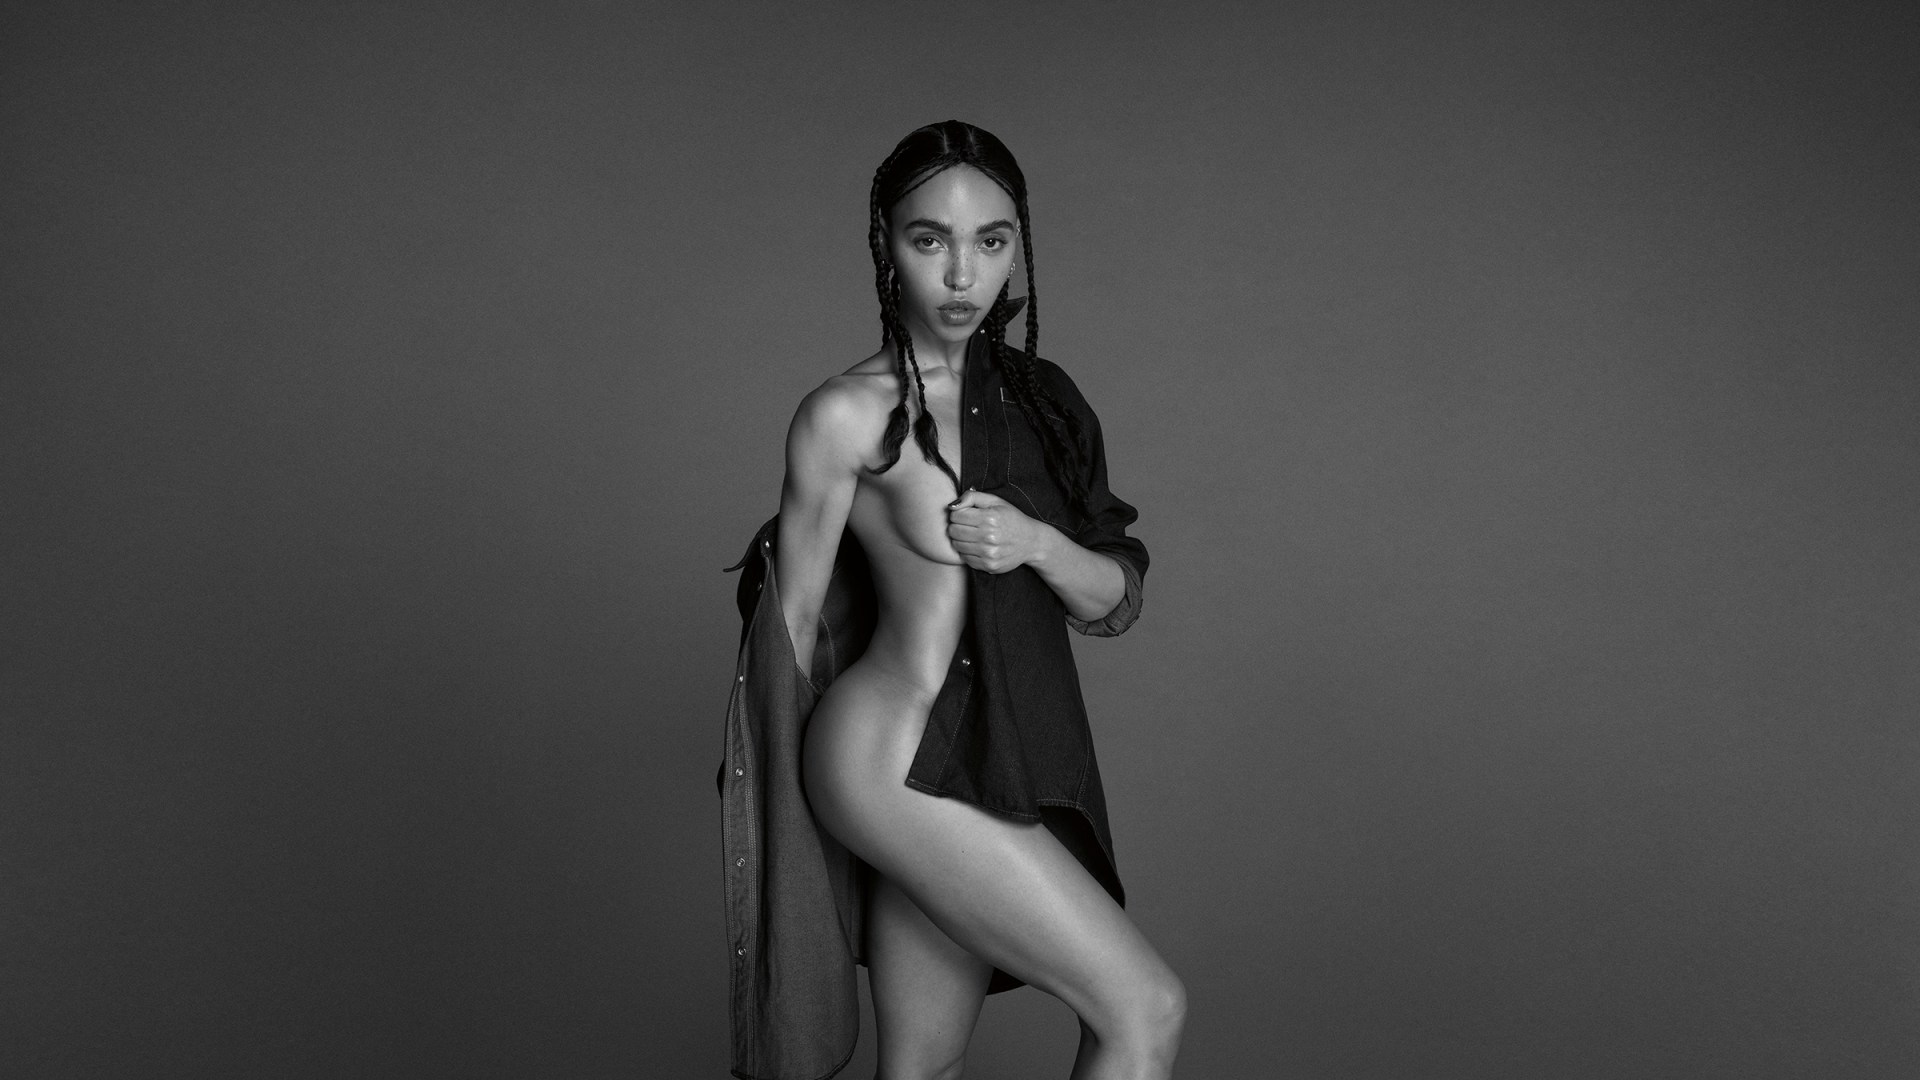 FKA Twigs Cleavage Controversy: Ban Overturned After Minor Complaints – See the Jaw-Dropping Poster!